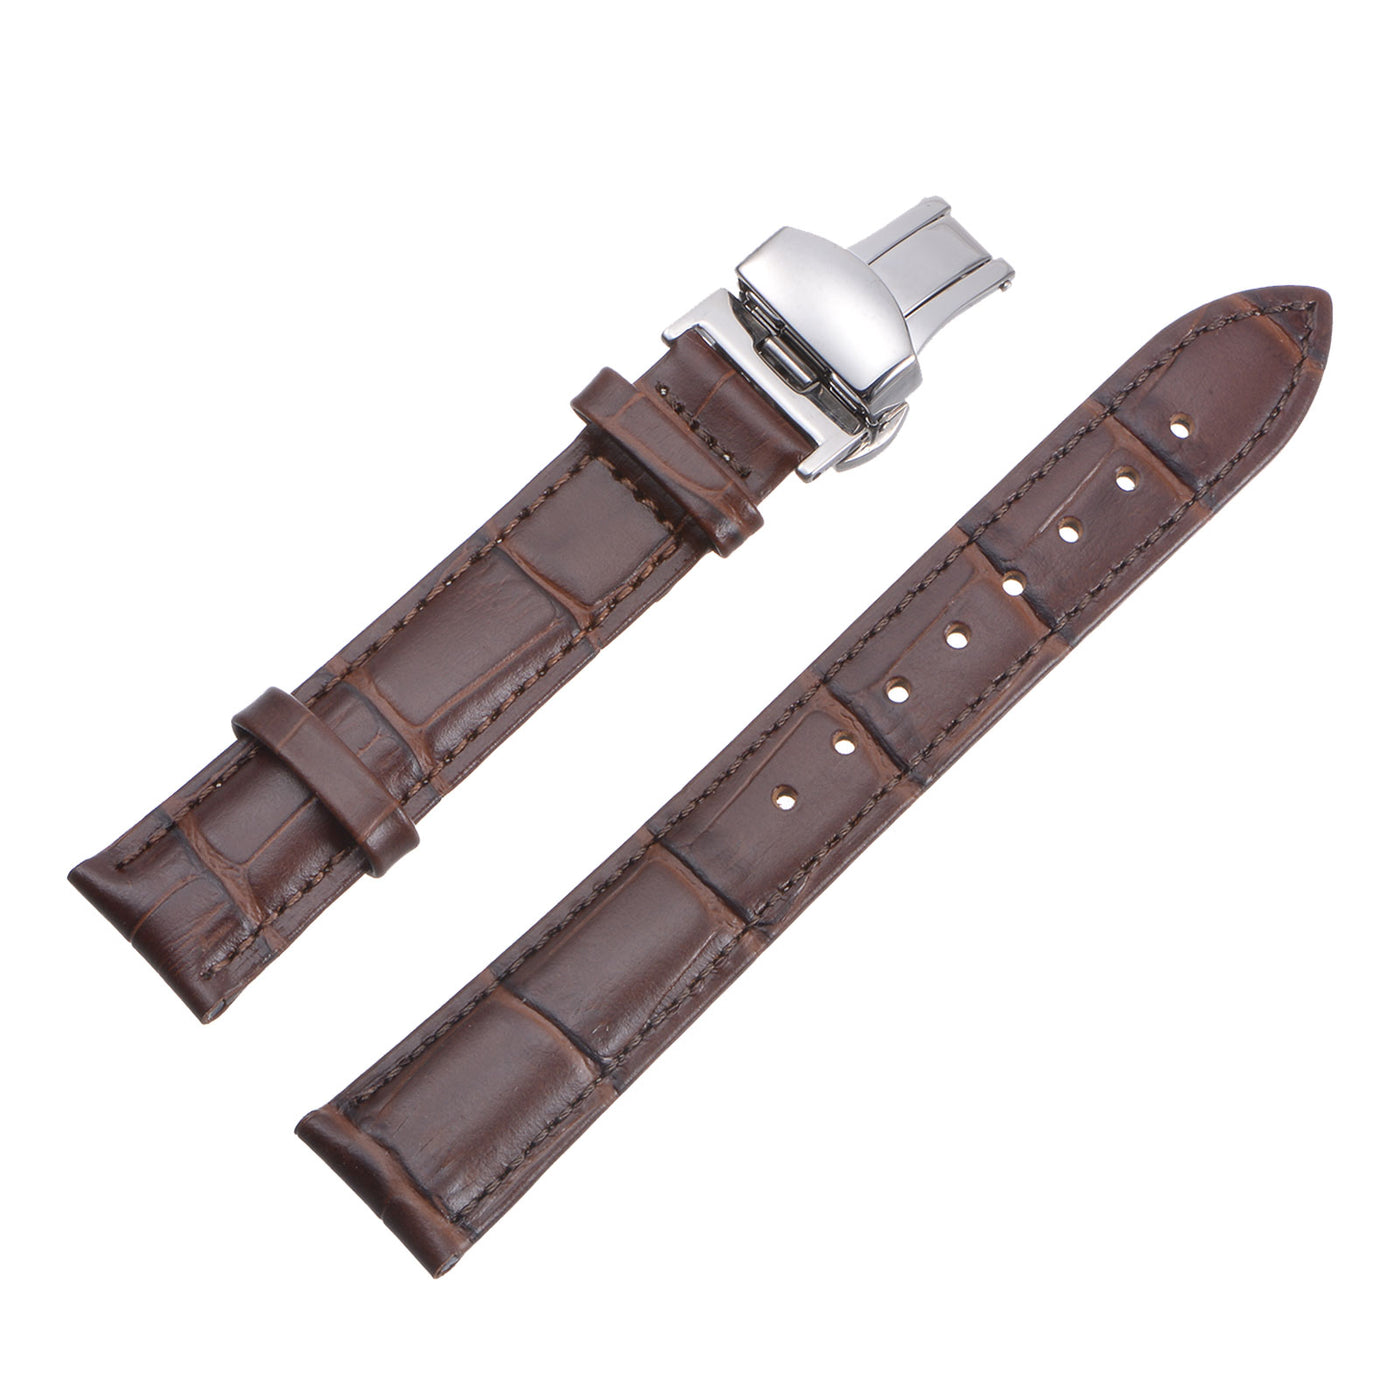 Uxcell Uxcell Cowhide Leather Band Deployment Buckle Watch Strap 19mm with Spring Bars, Black